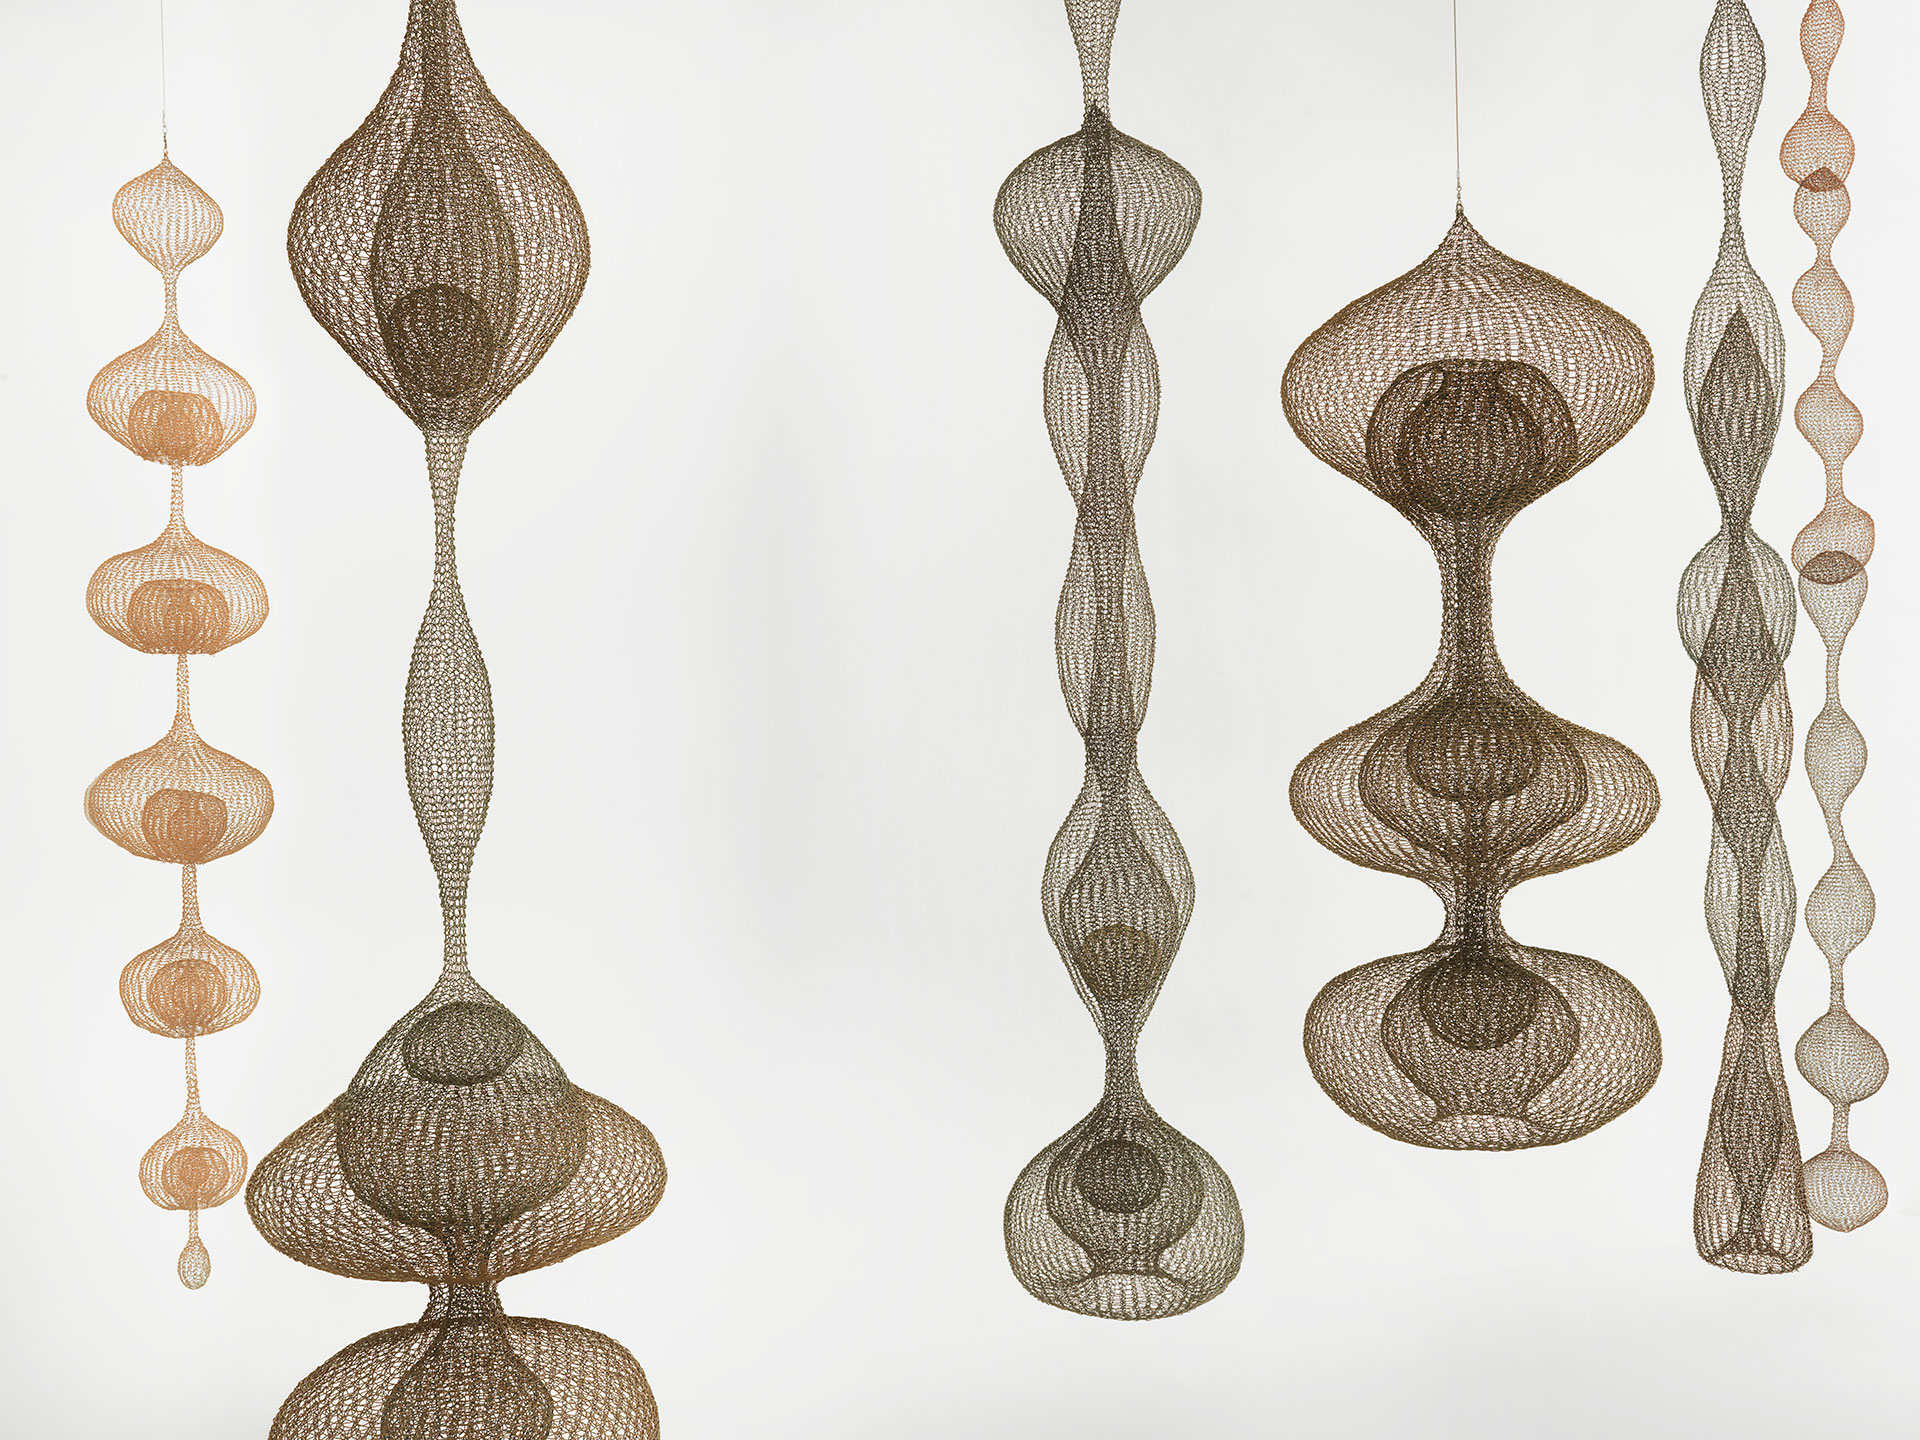 An installation view of the exhibition, Ruth Asawa: Life's Work at the Pulitzer Foundation in St. Louis, dated 2018.